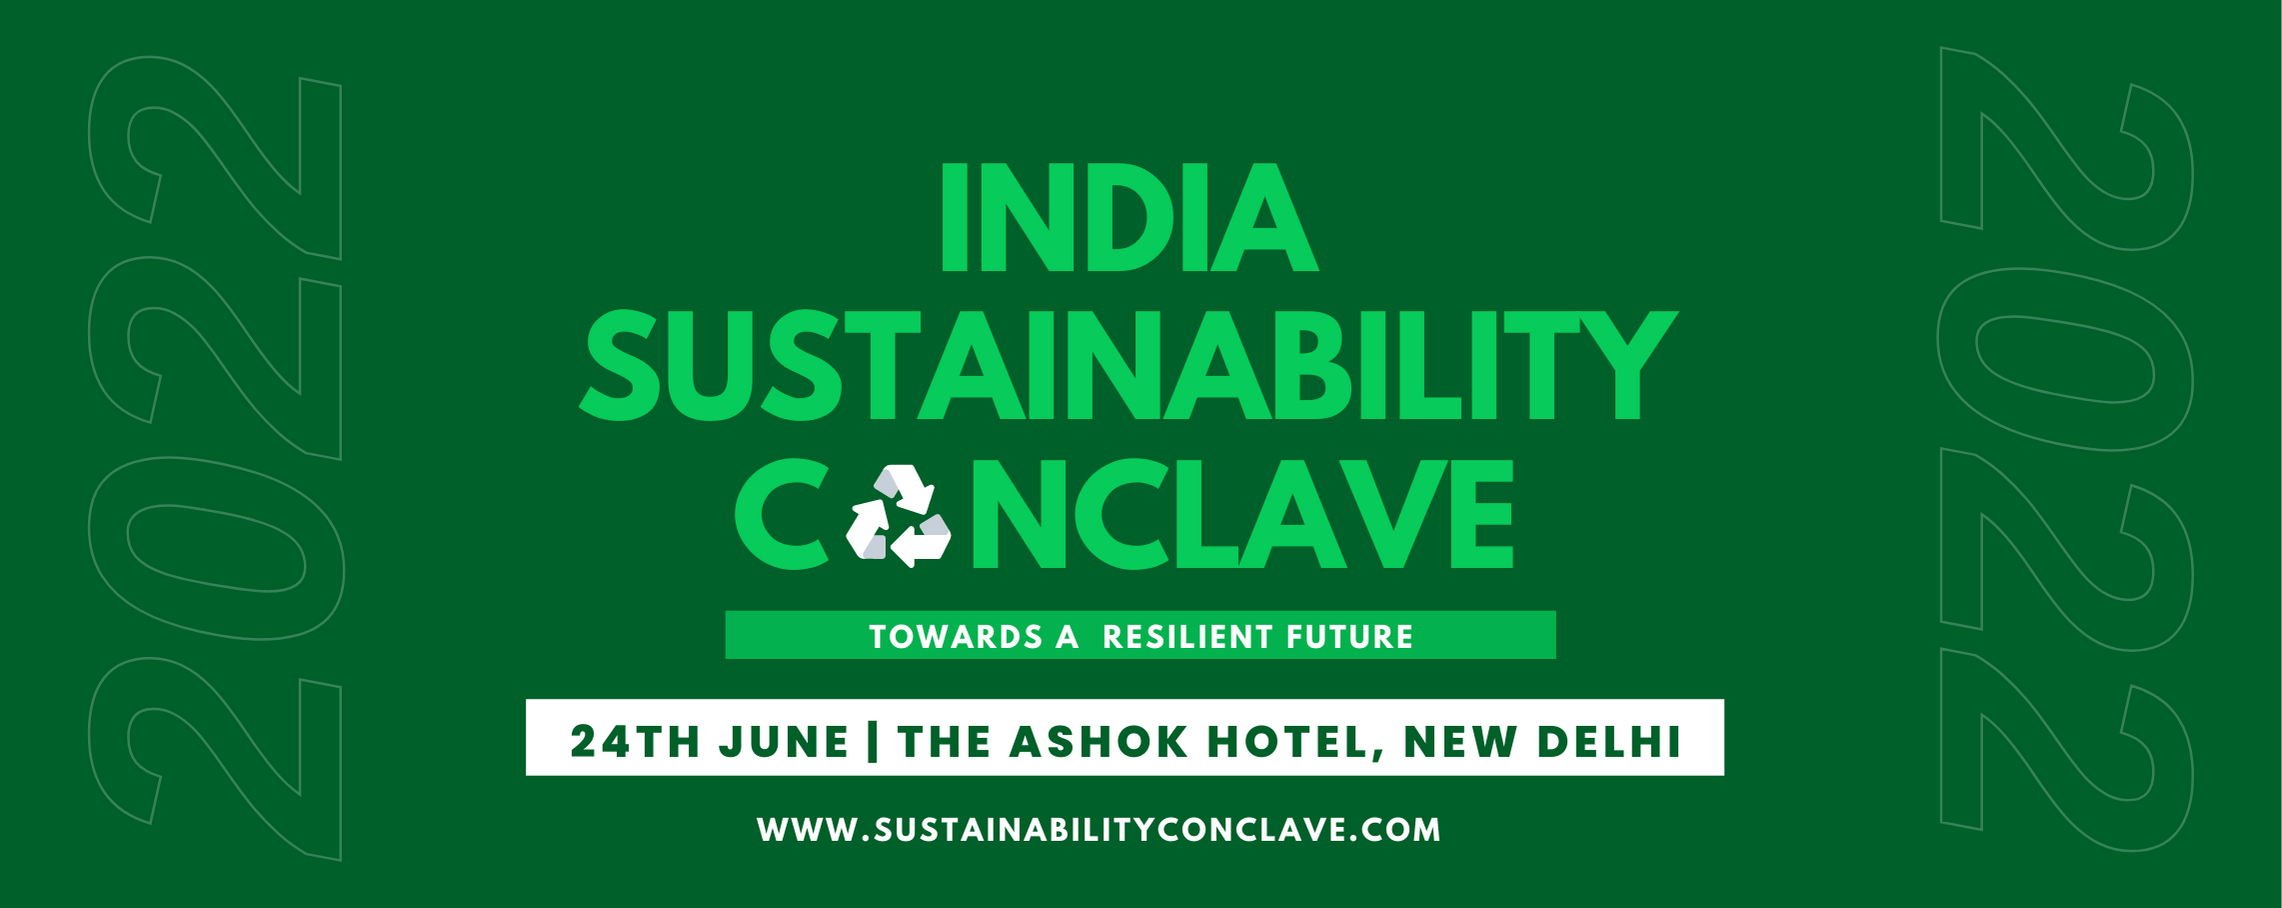 India Sustainability Conclave